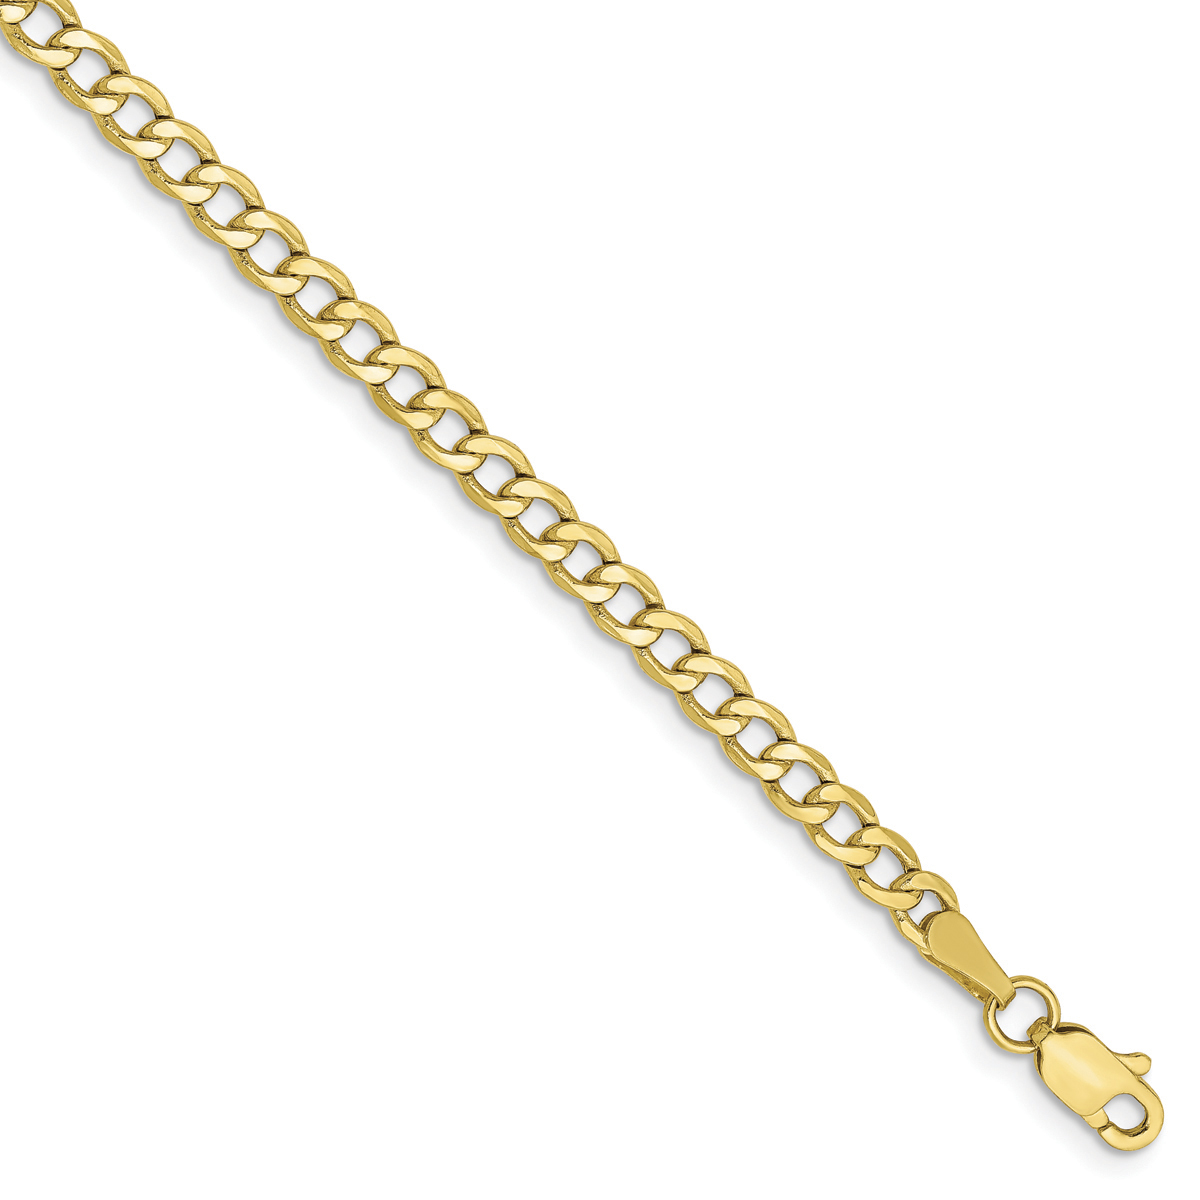 Unisex Gold Classics(tm) 10kt. Gold 3.35mm 16in. Chain Necklace